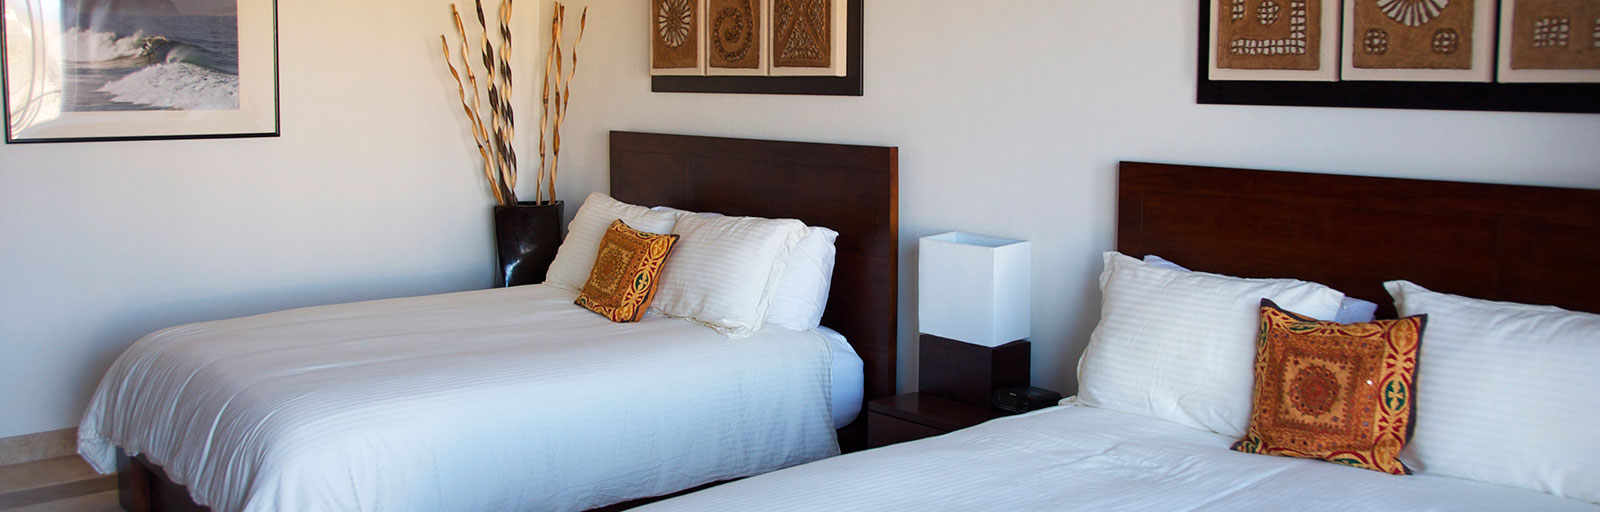 Mexico Yoga Retreat Center: Queen Beds in Upstairs Guest Bedroom